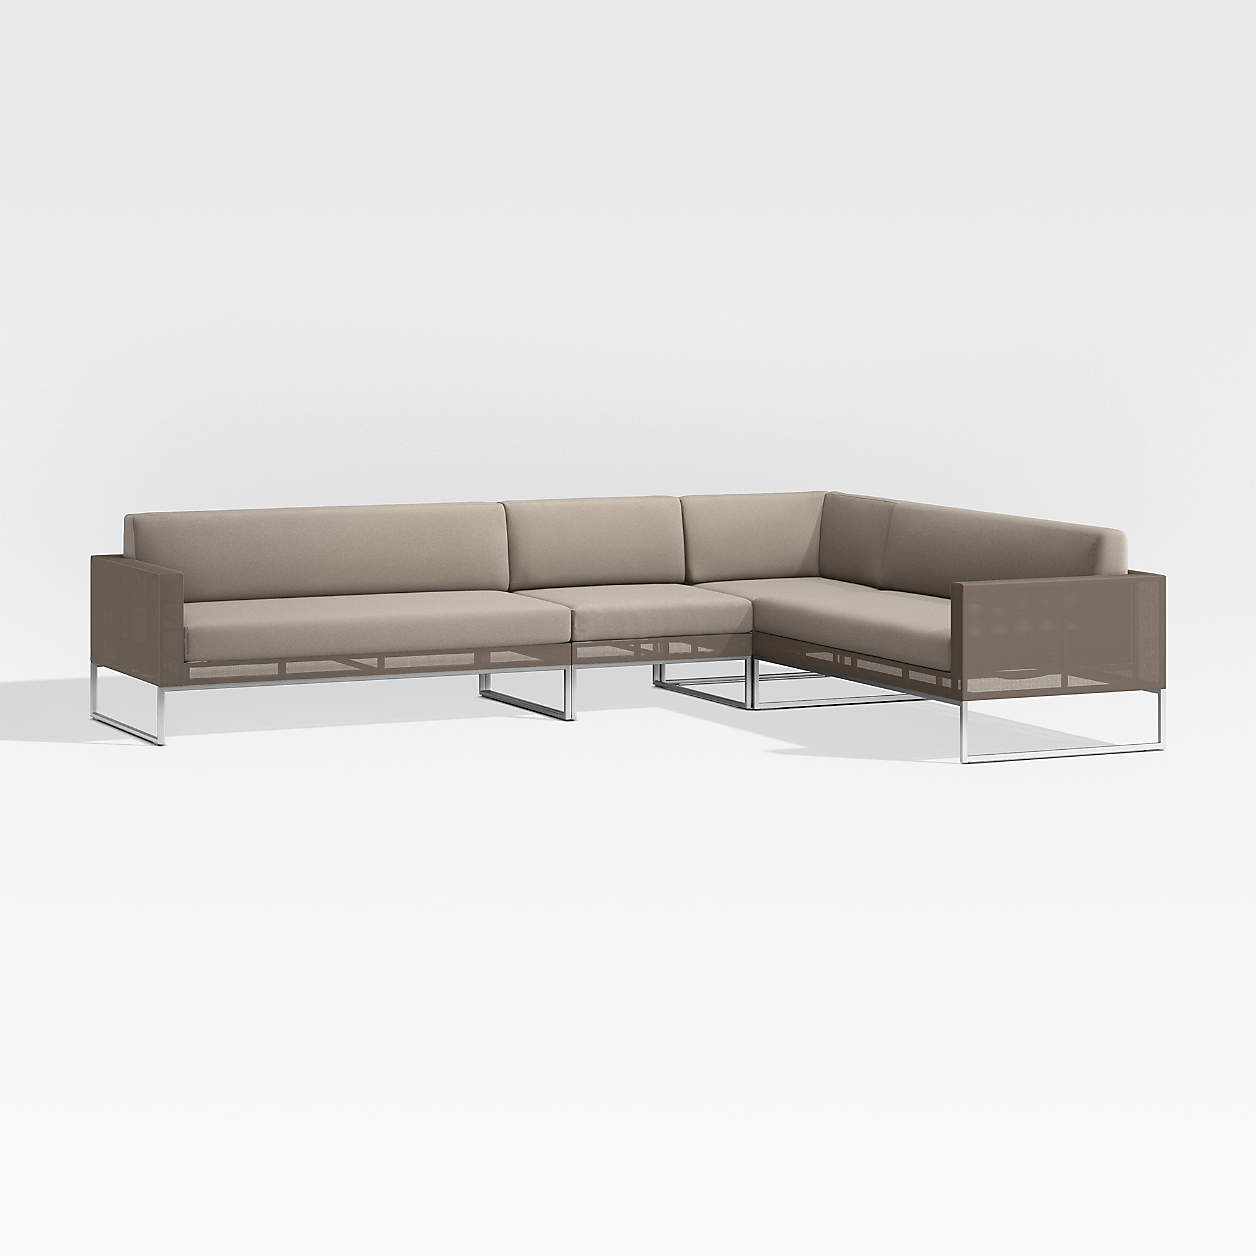 Dune Taupe 4Piece Sectional Sofa with Sunbrella Cushions